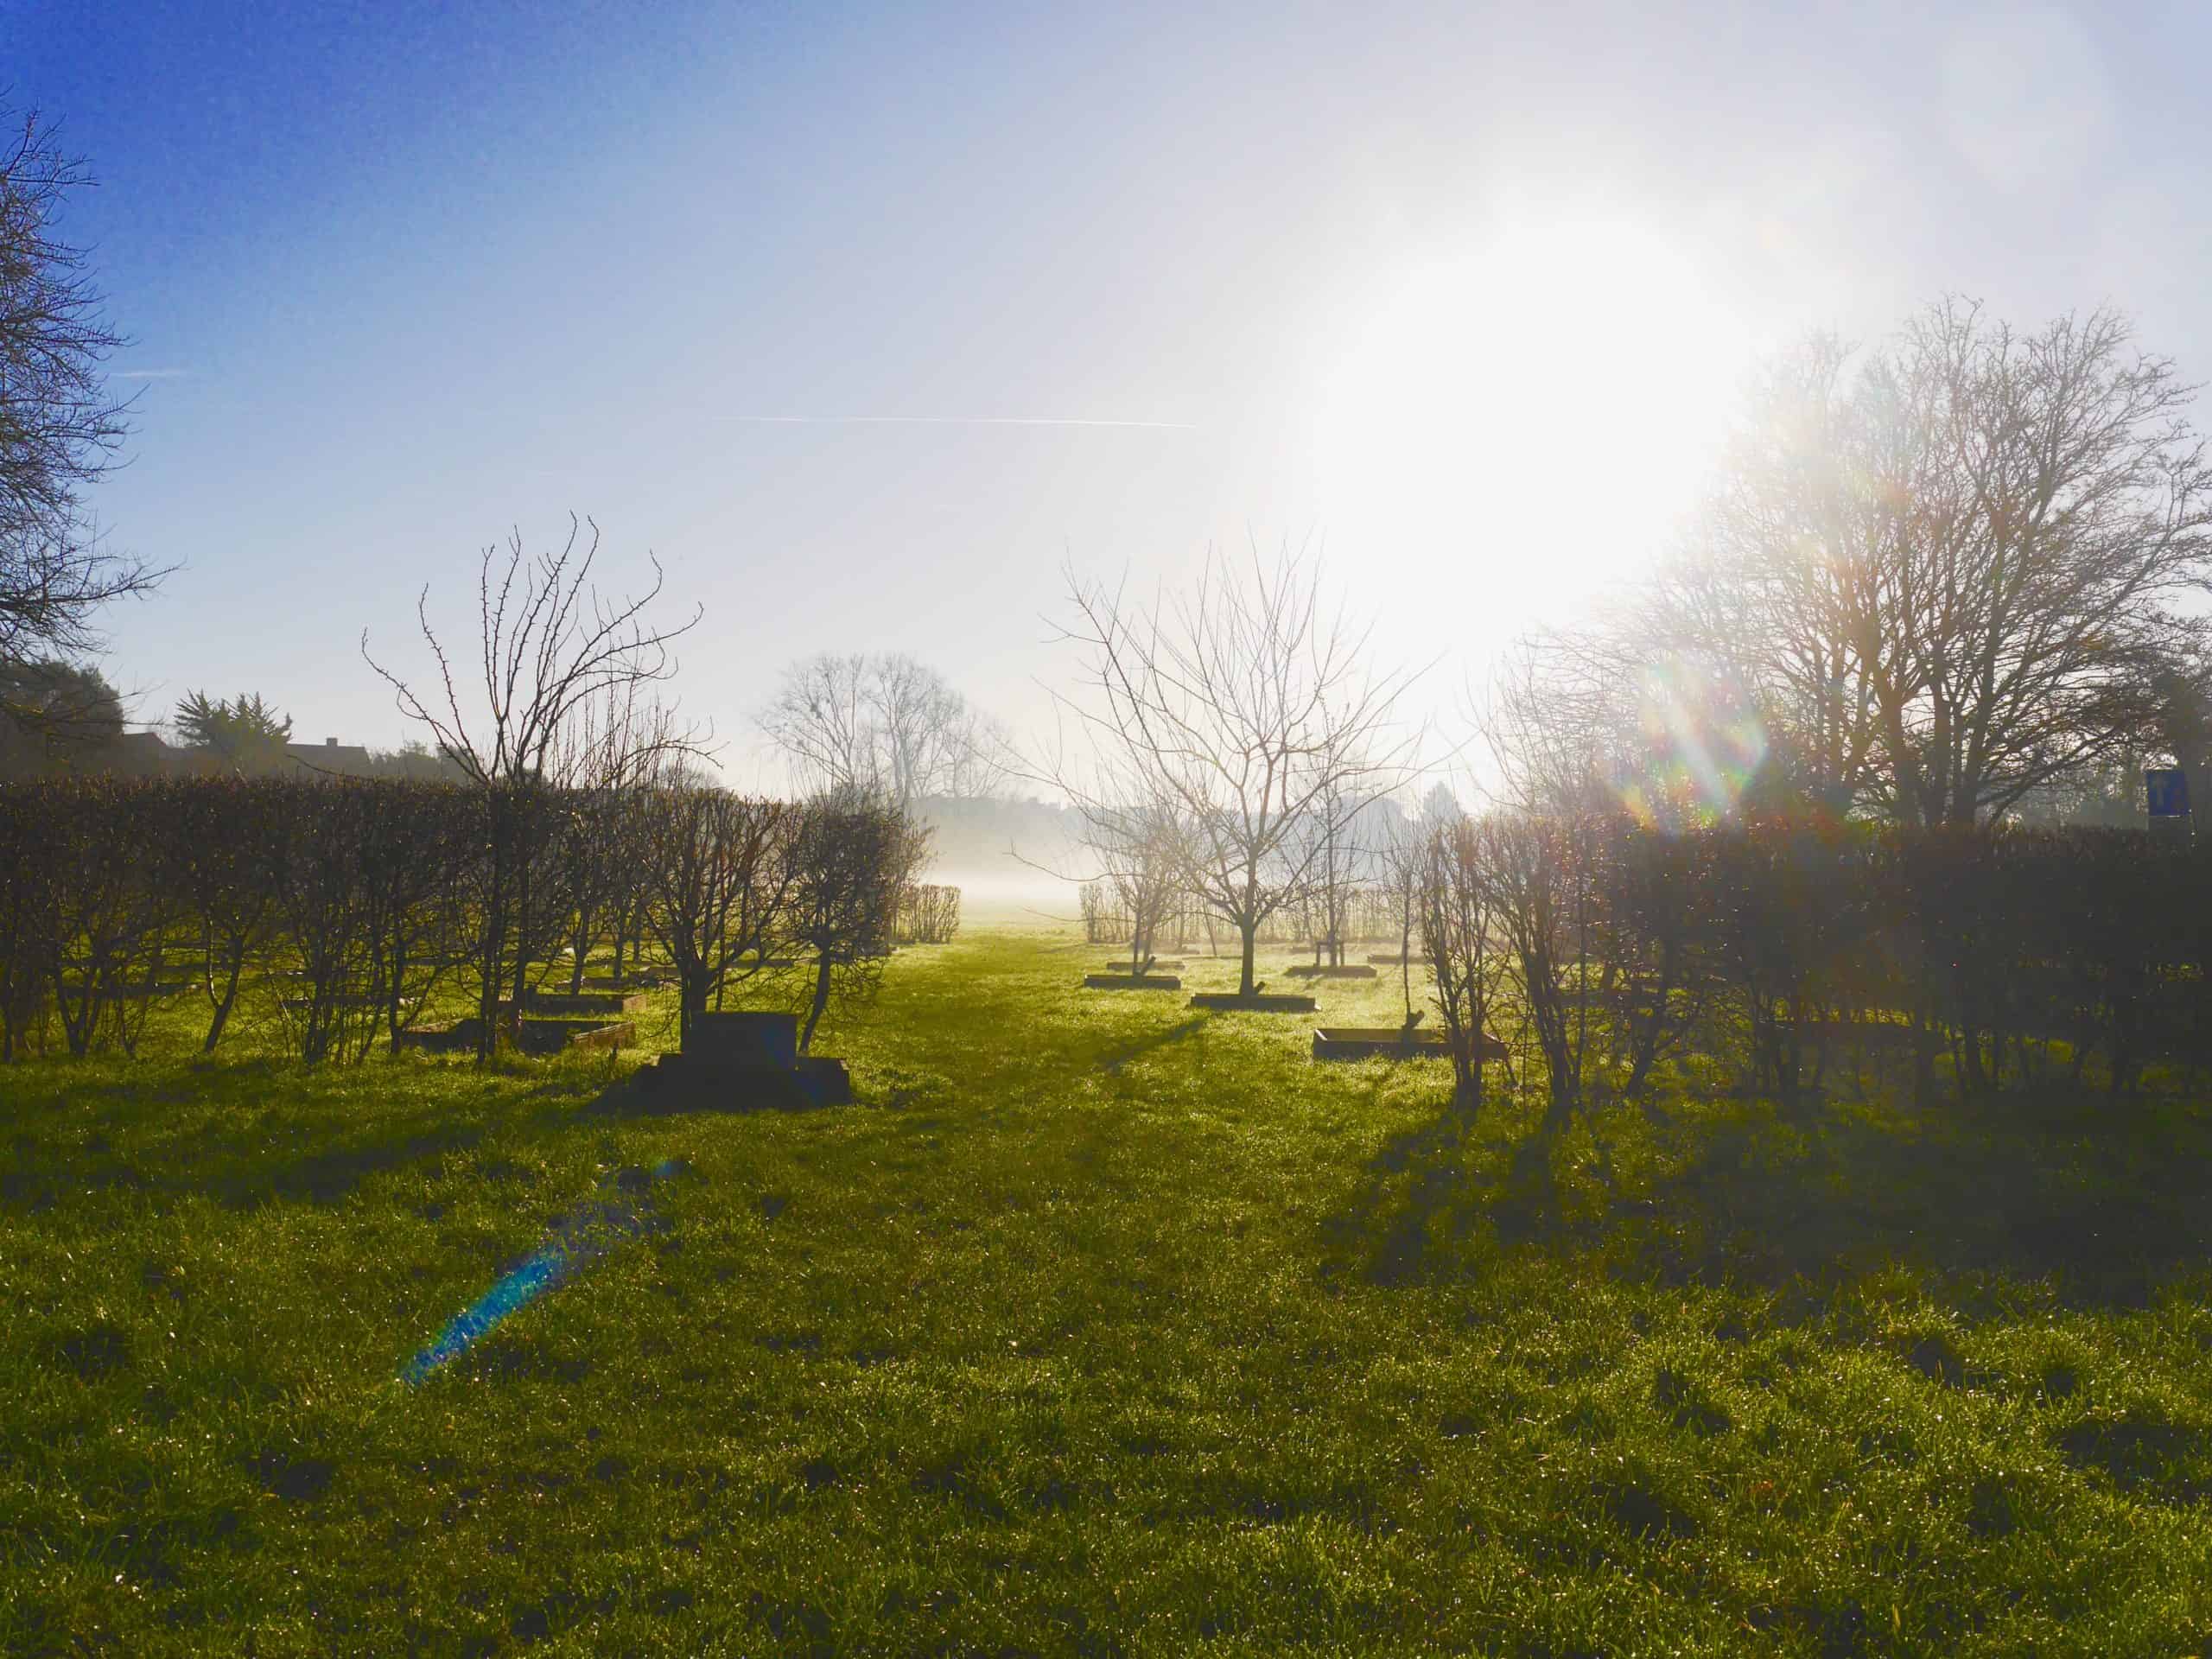 Bright morning sun illuminating an expansive grassy field with scattered trees and a misty background.